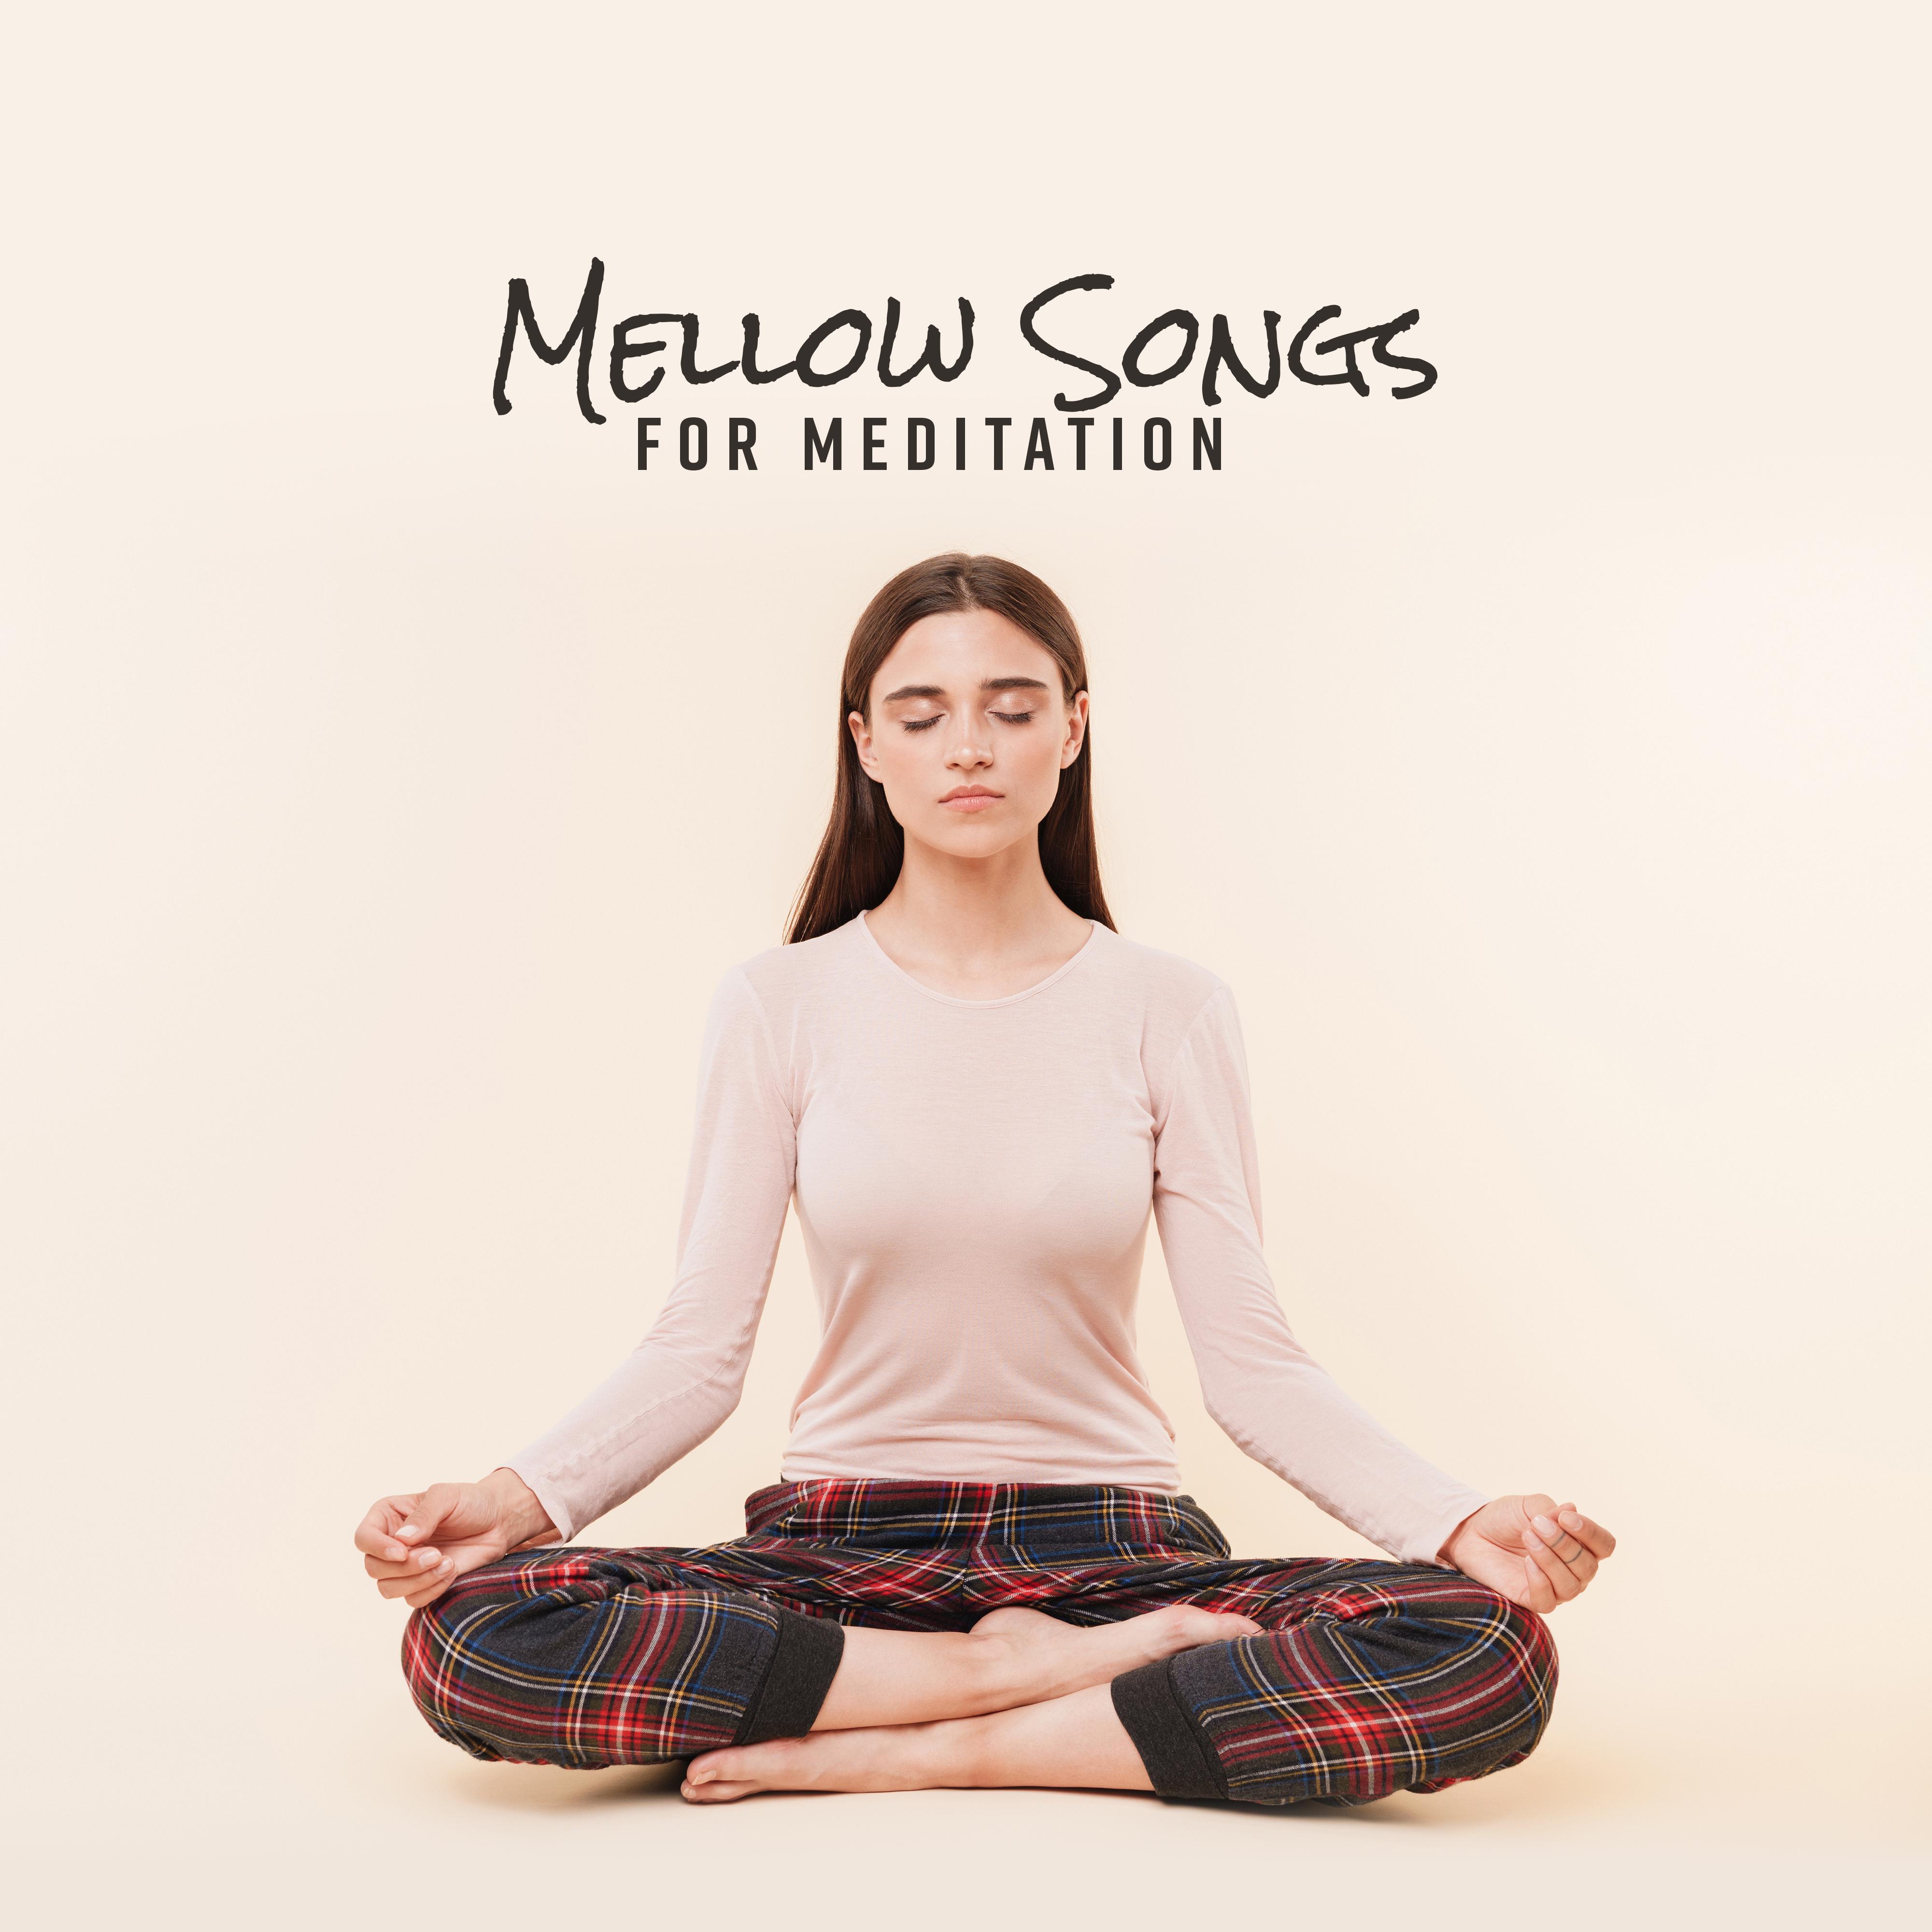 Mellow Songs for Meditation